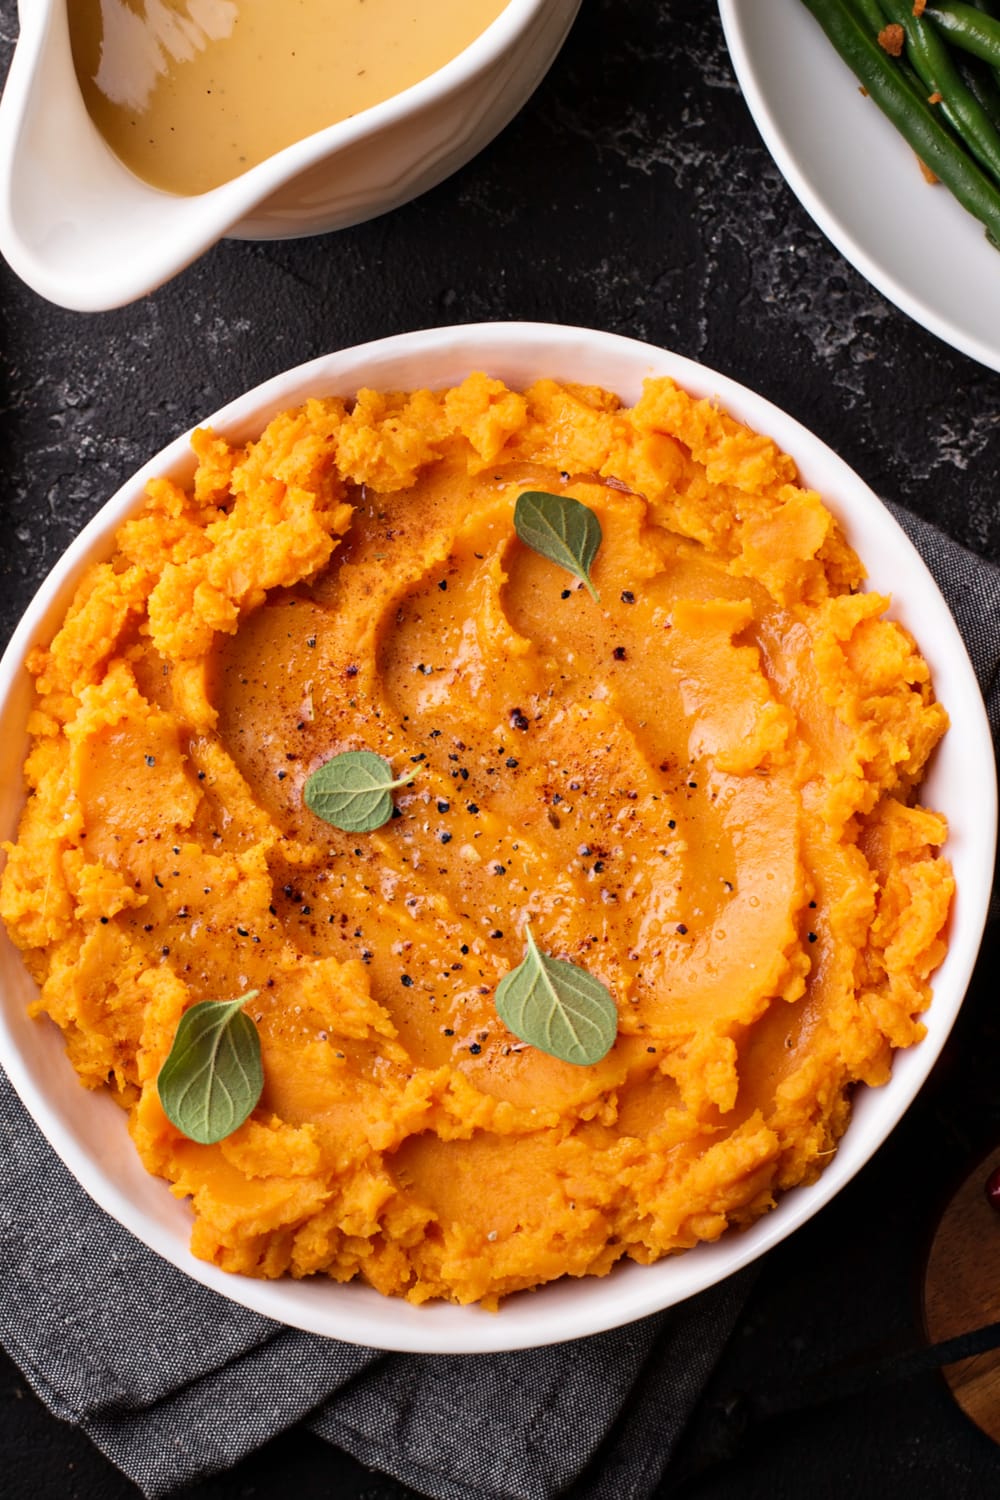 Top view of mashed sweet potatoes on a bowl.